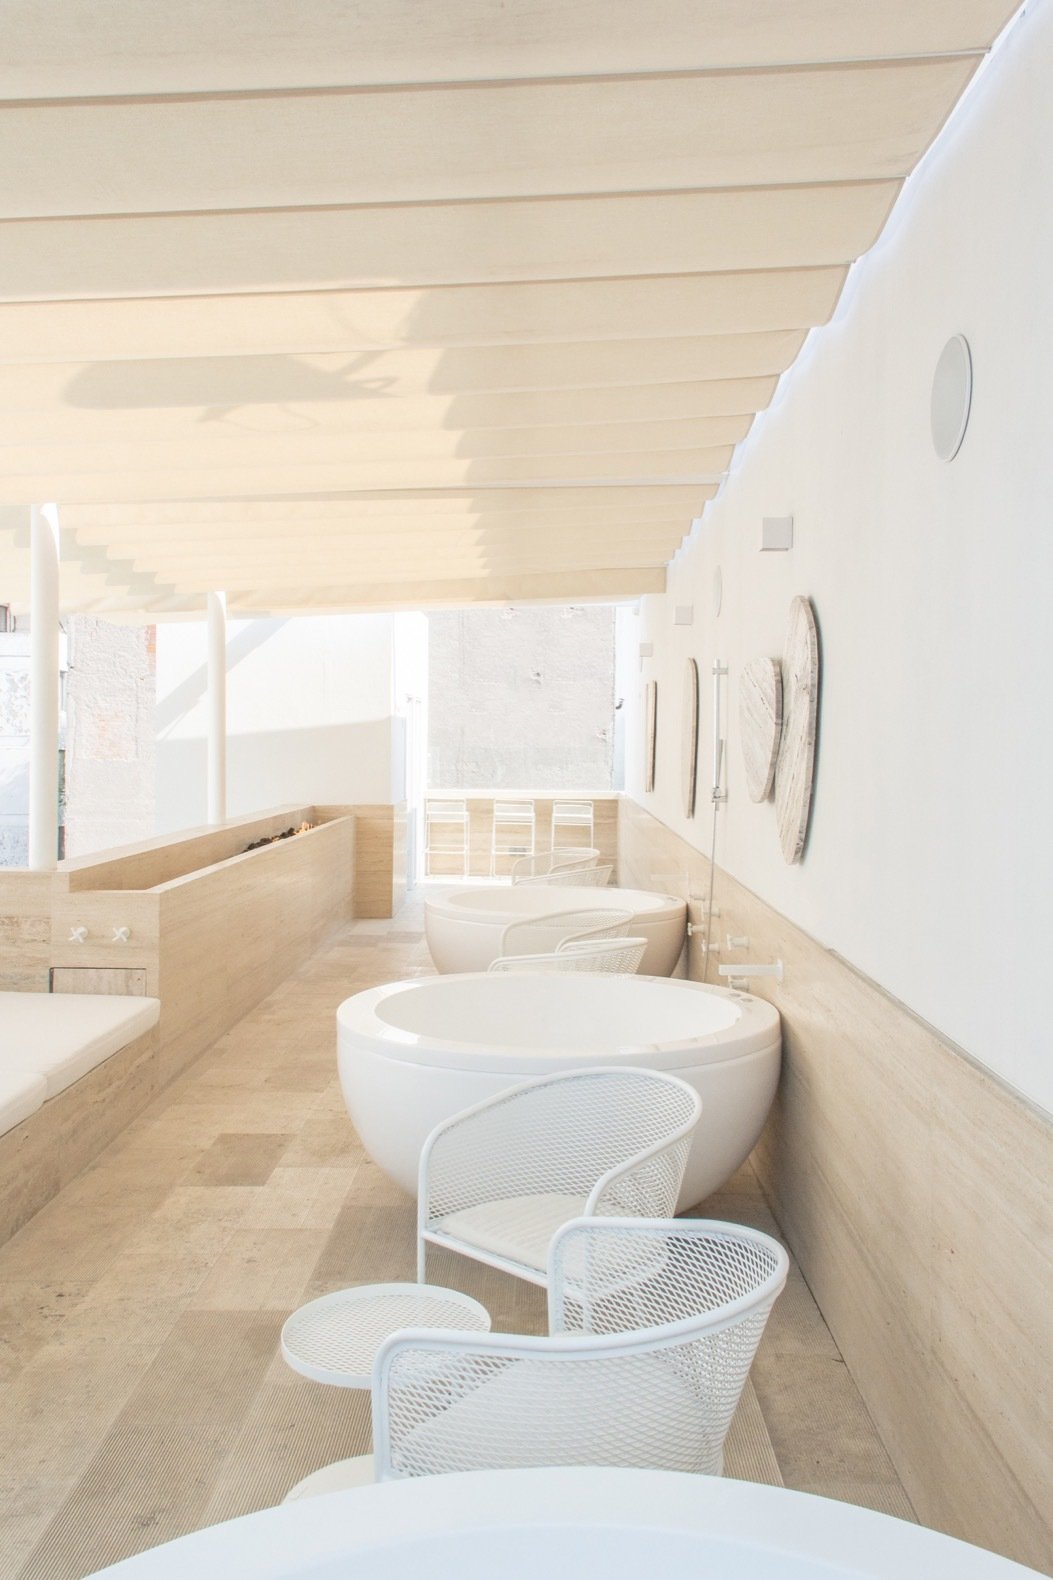 the rooftop deck features four private onsen baths that overlook panoramic city views